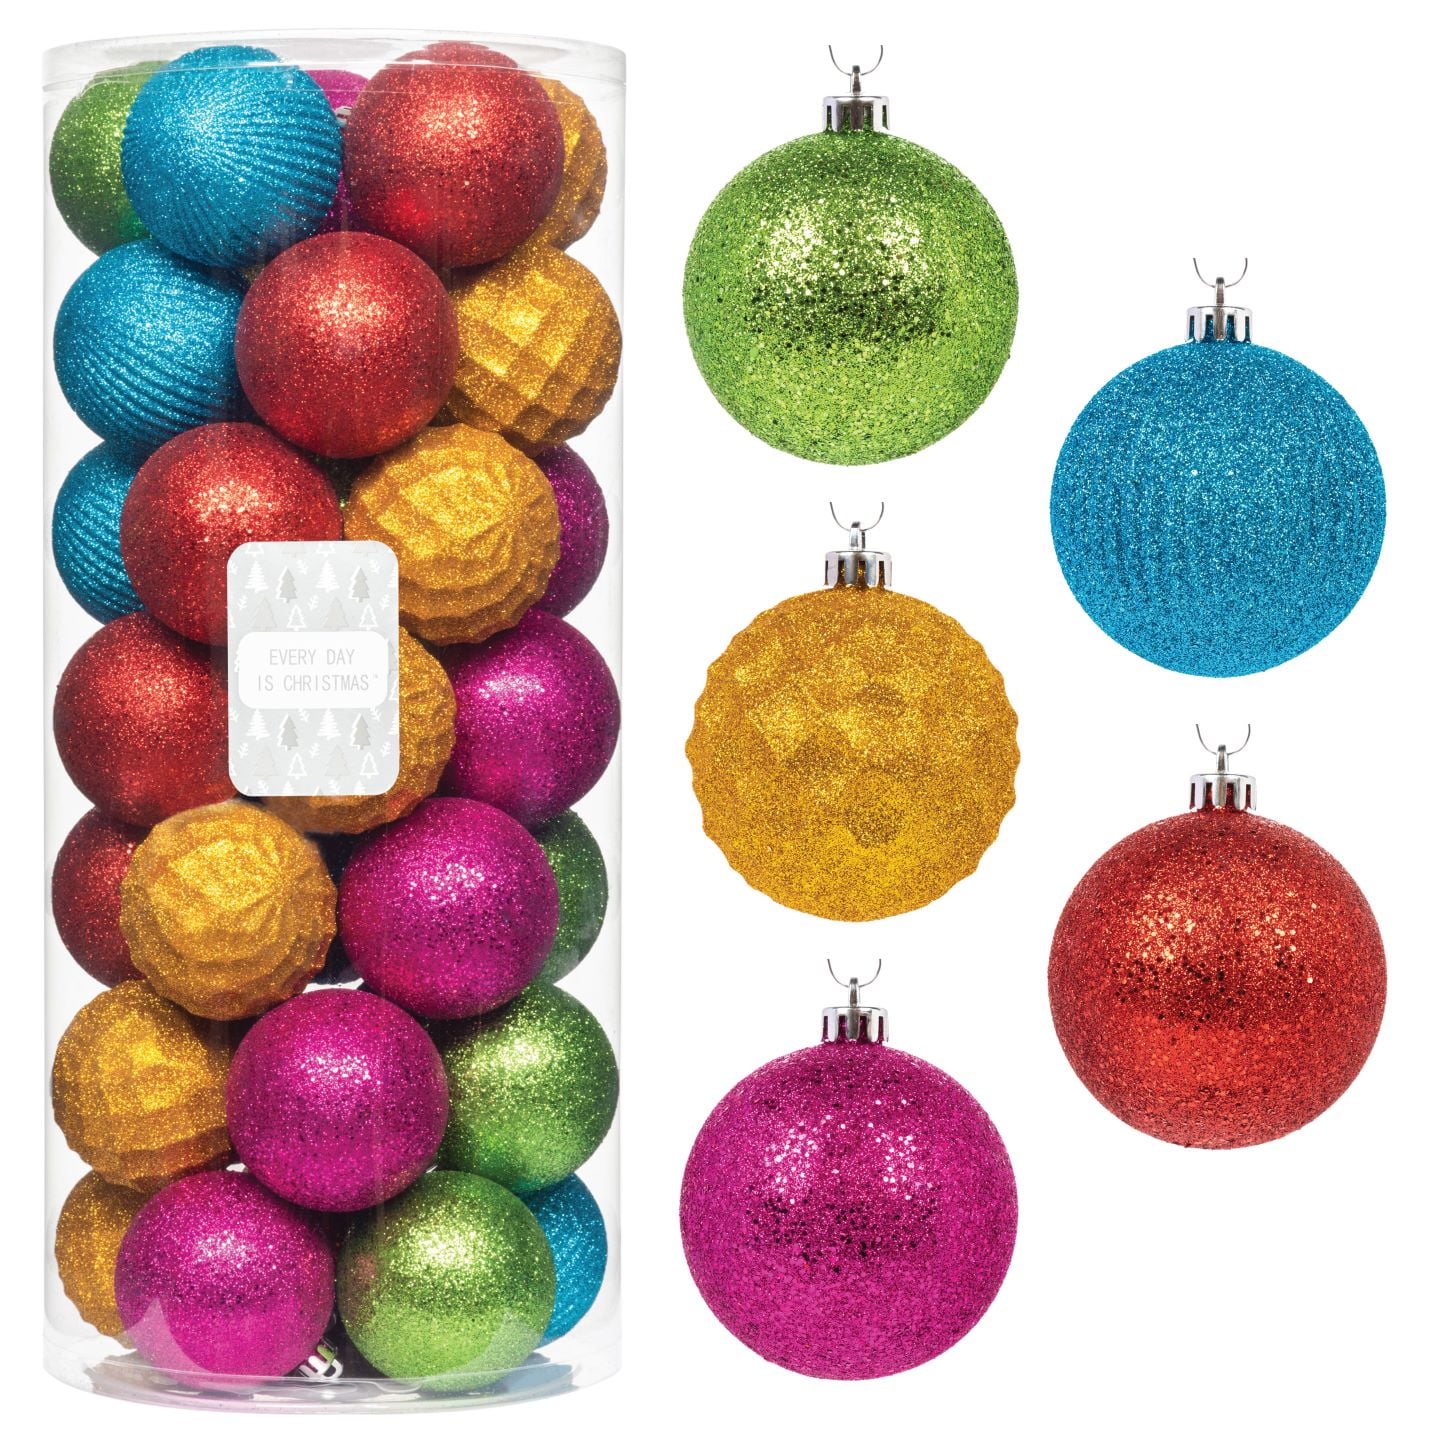 Every Day is Christmas Ornaments 35ct 70mm Christmas Ornaments ...